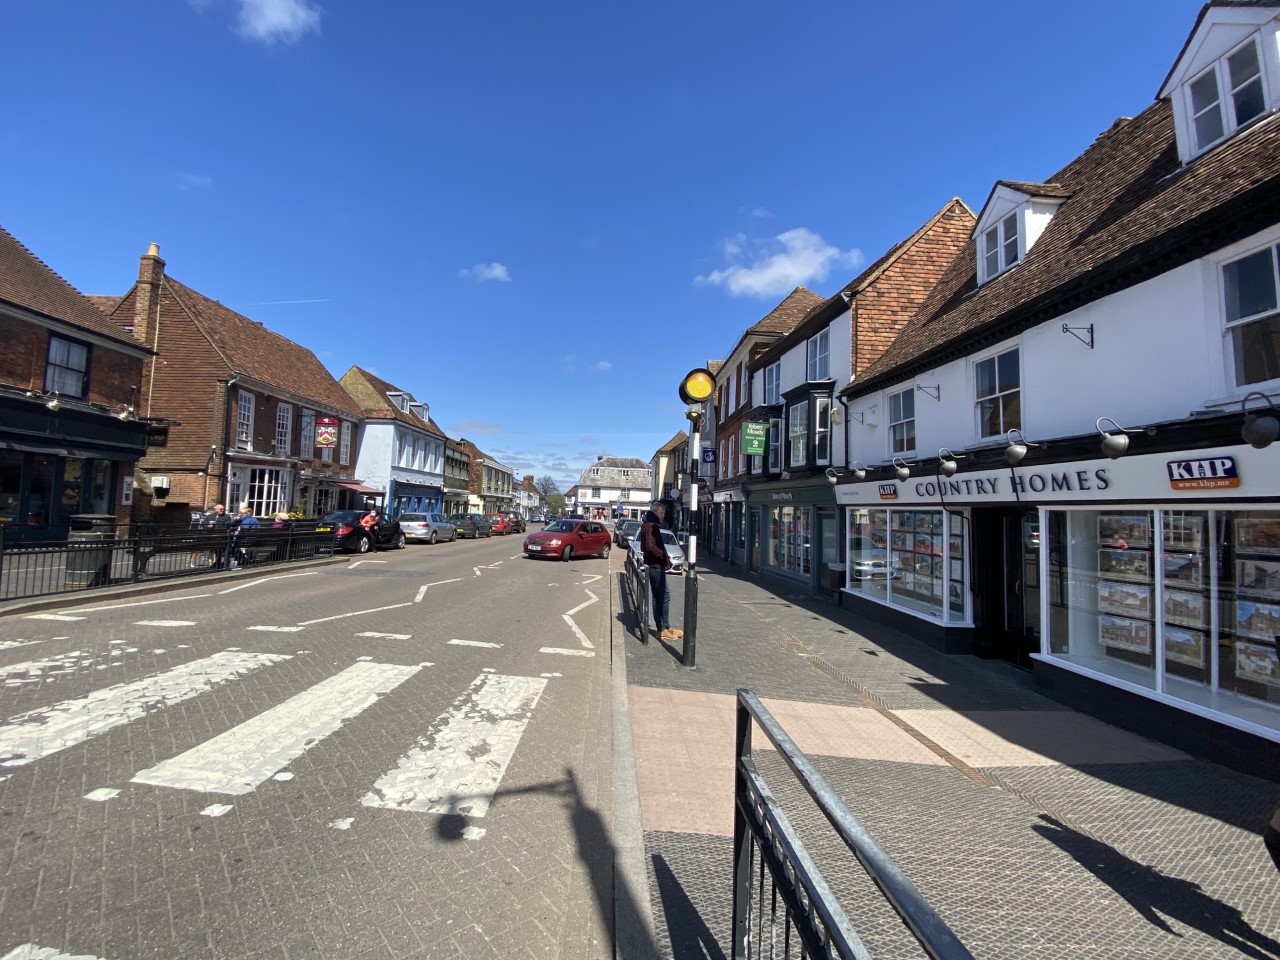 KHP Country Homes - Estate and Letting Agents in West Malling 75-77 High St, West Malling